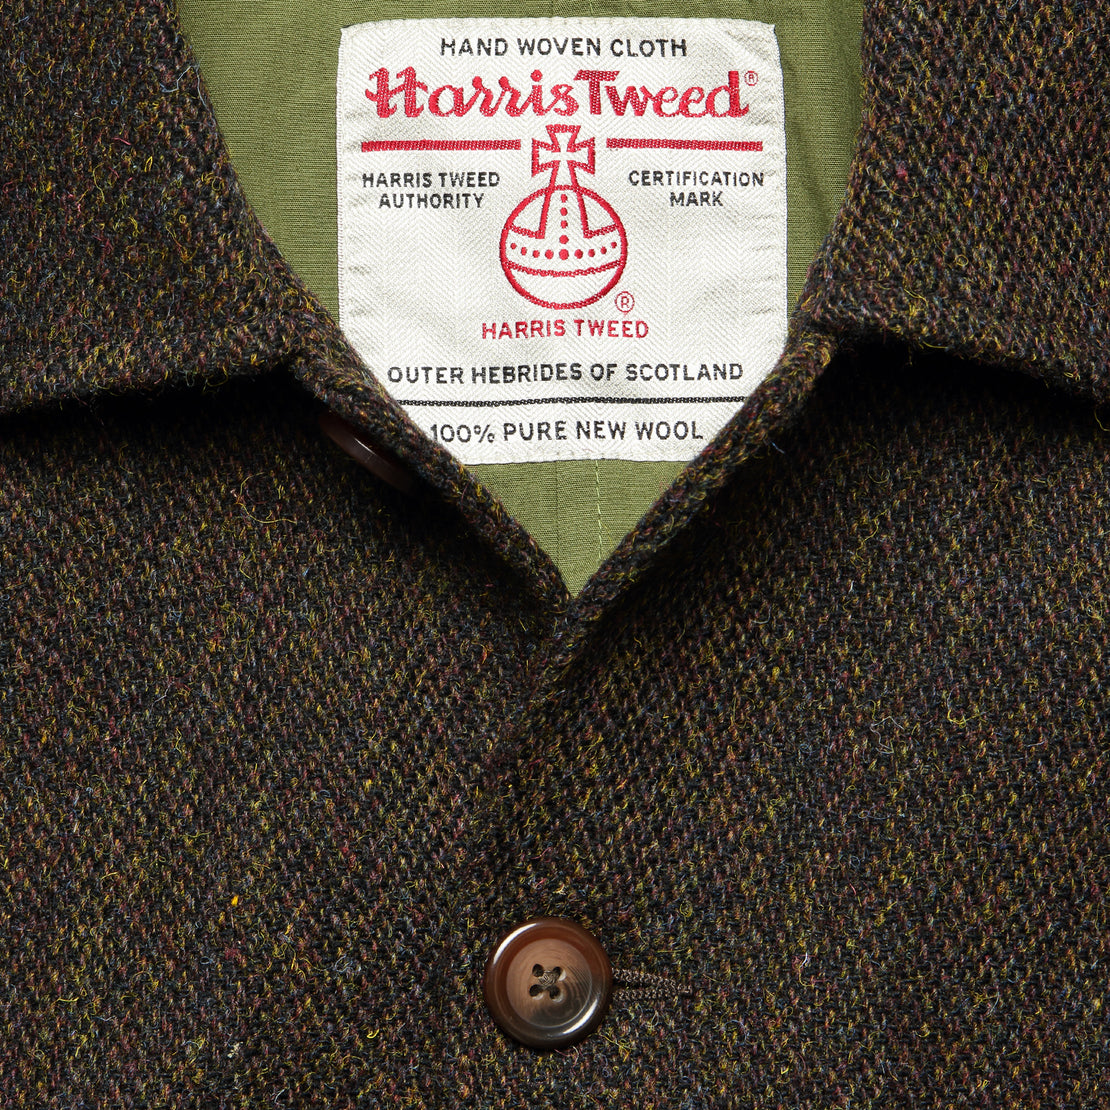 Bakers Jacket - Olive Brown Tweed - Universal Works - STAG Provisions - Outerwear - Coat / Jacket